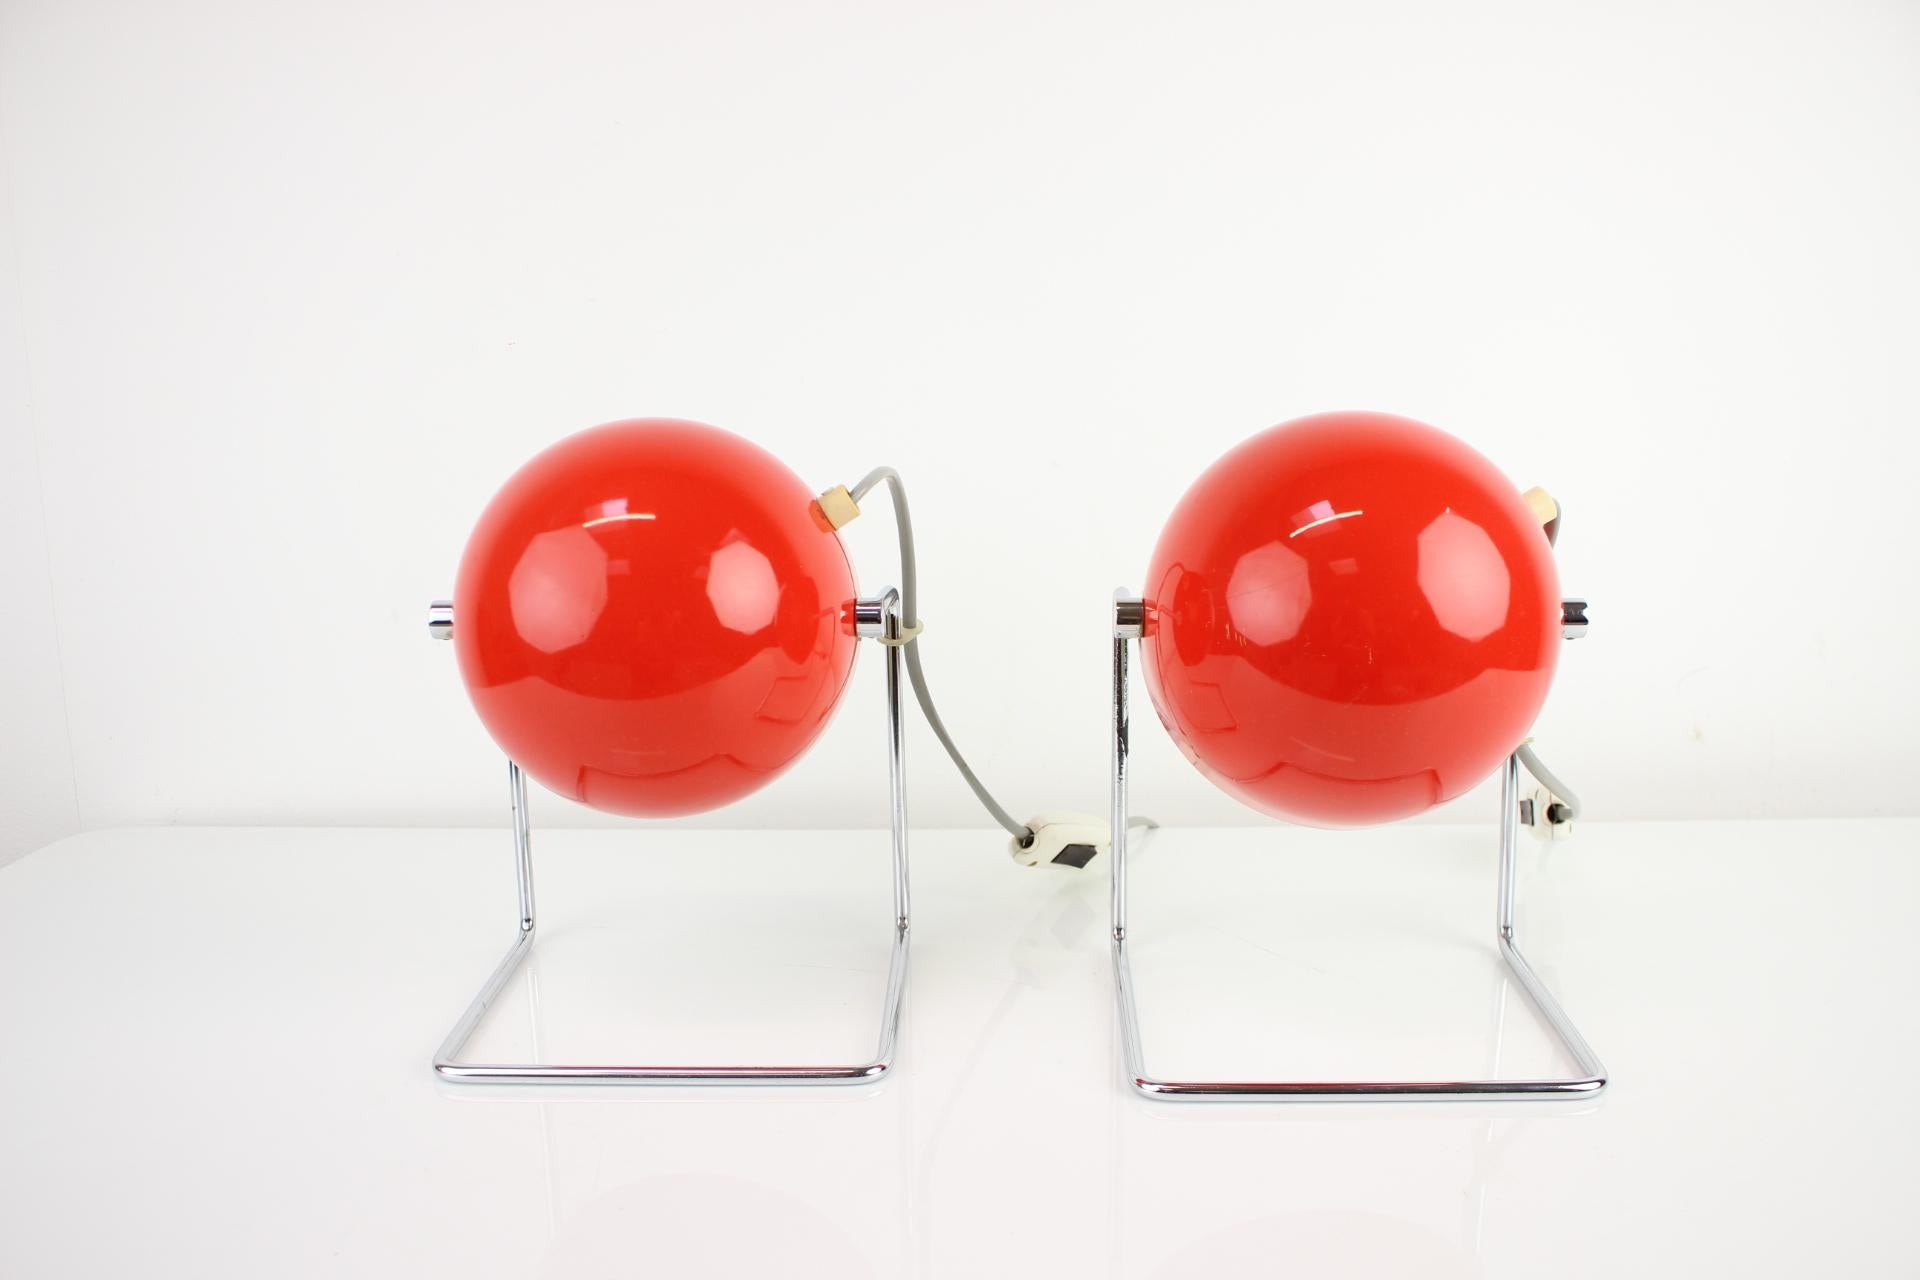 Czech Mid-Century Rare Table Lamps Designed by Josef Hurka for Napako, 1960's For Sale